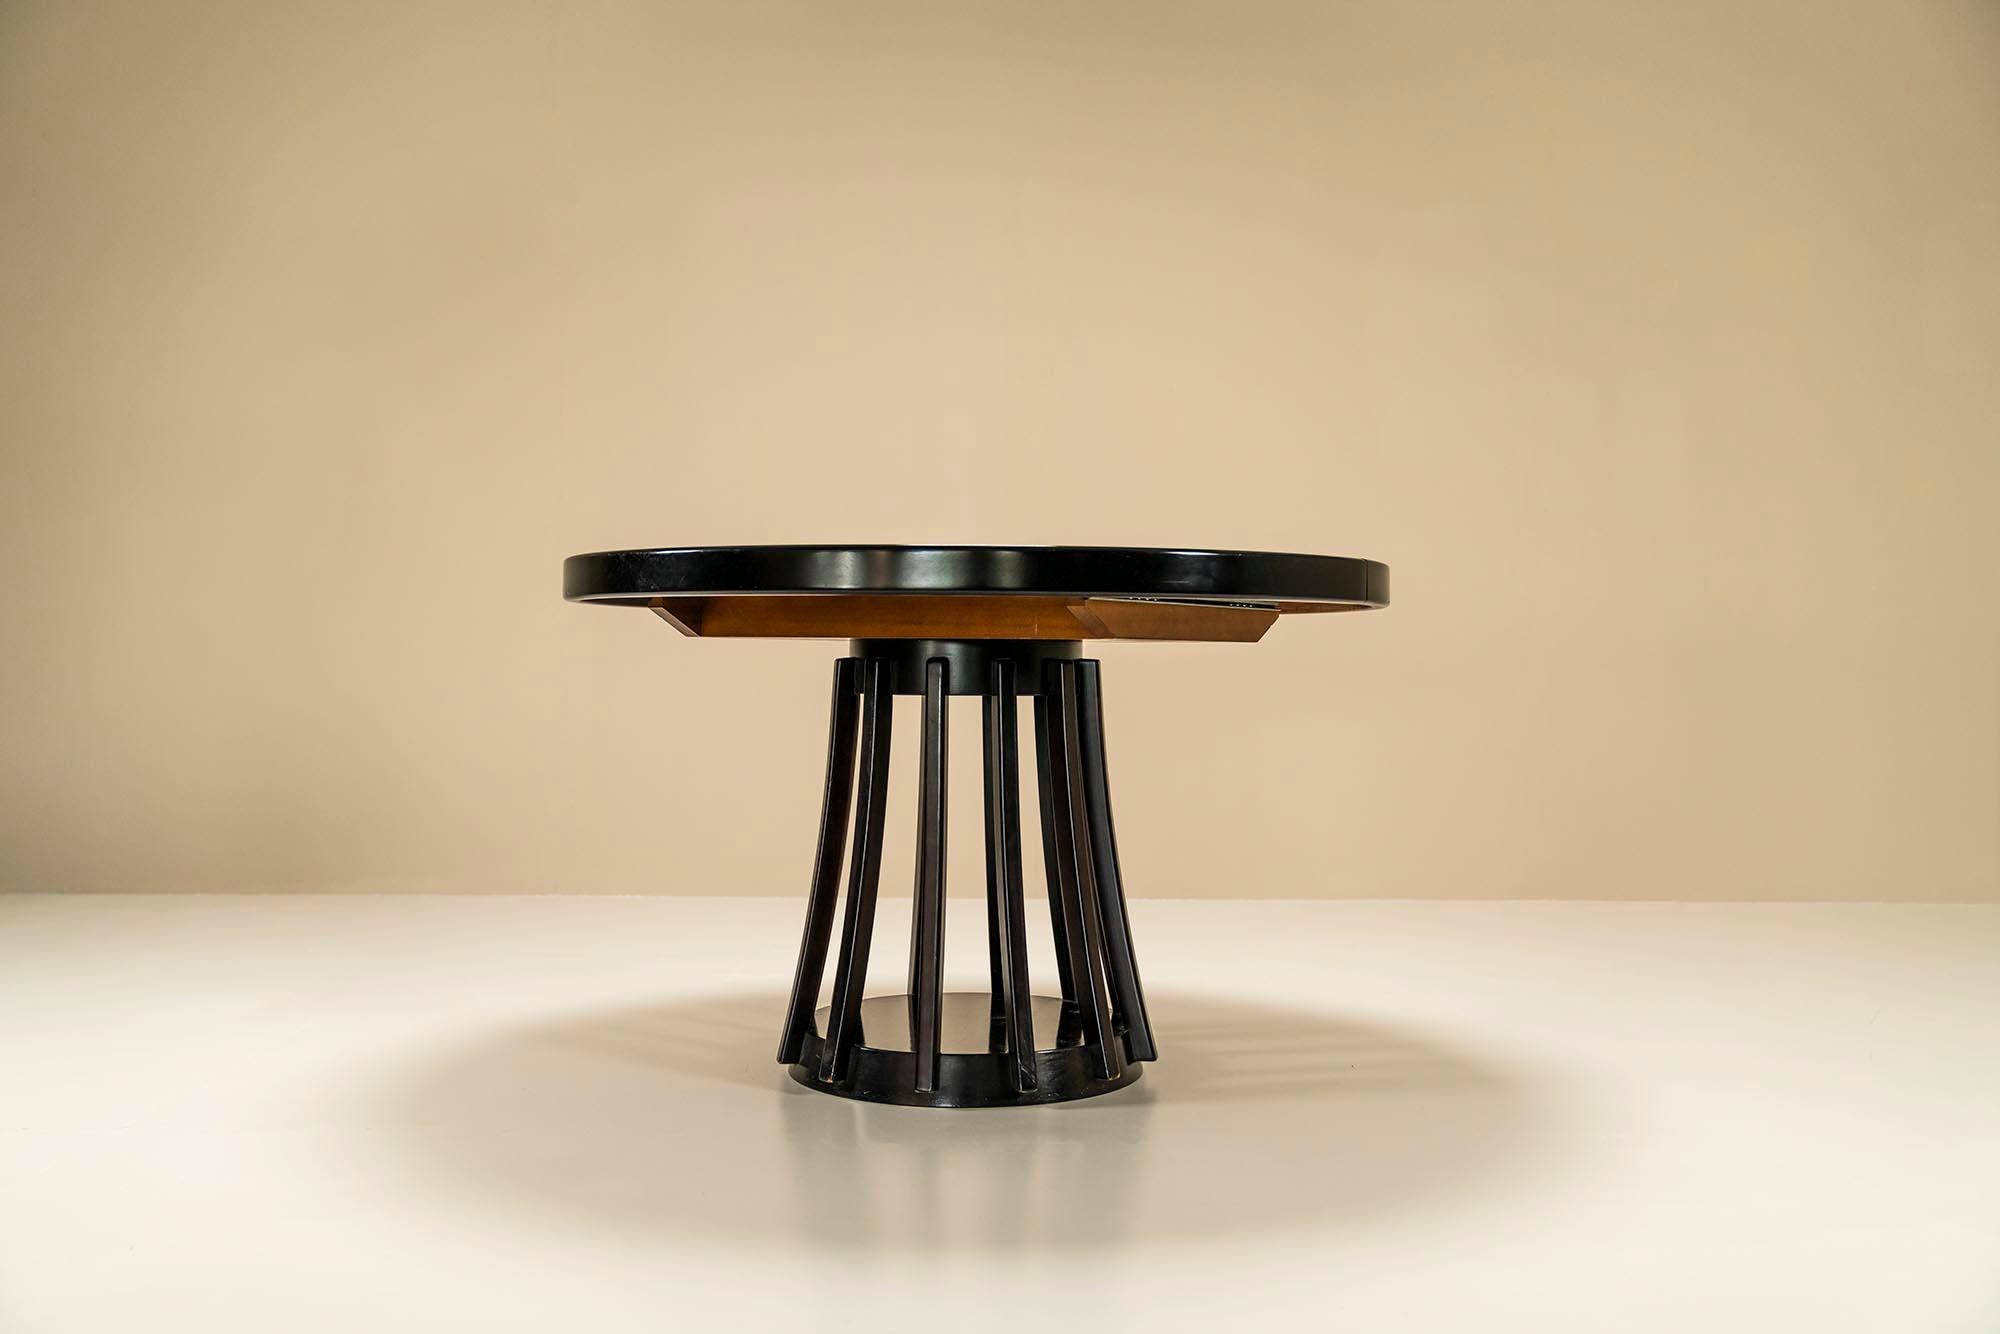 The Angelo Mangiarotti S11 round dining table, manufactured by Sorgente dei Mobili around the year 1970, is an exquisite piece of furniture that exemplifies timeless design and exceptional craftsmanship. With its unique features and meticulous